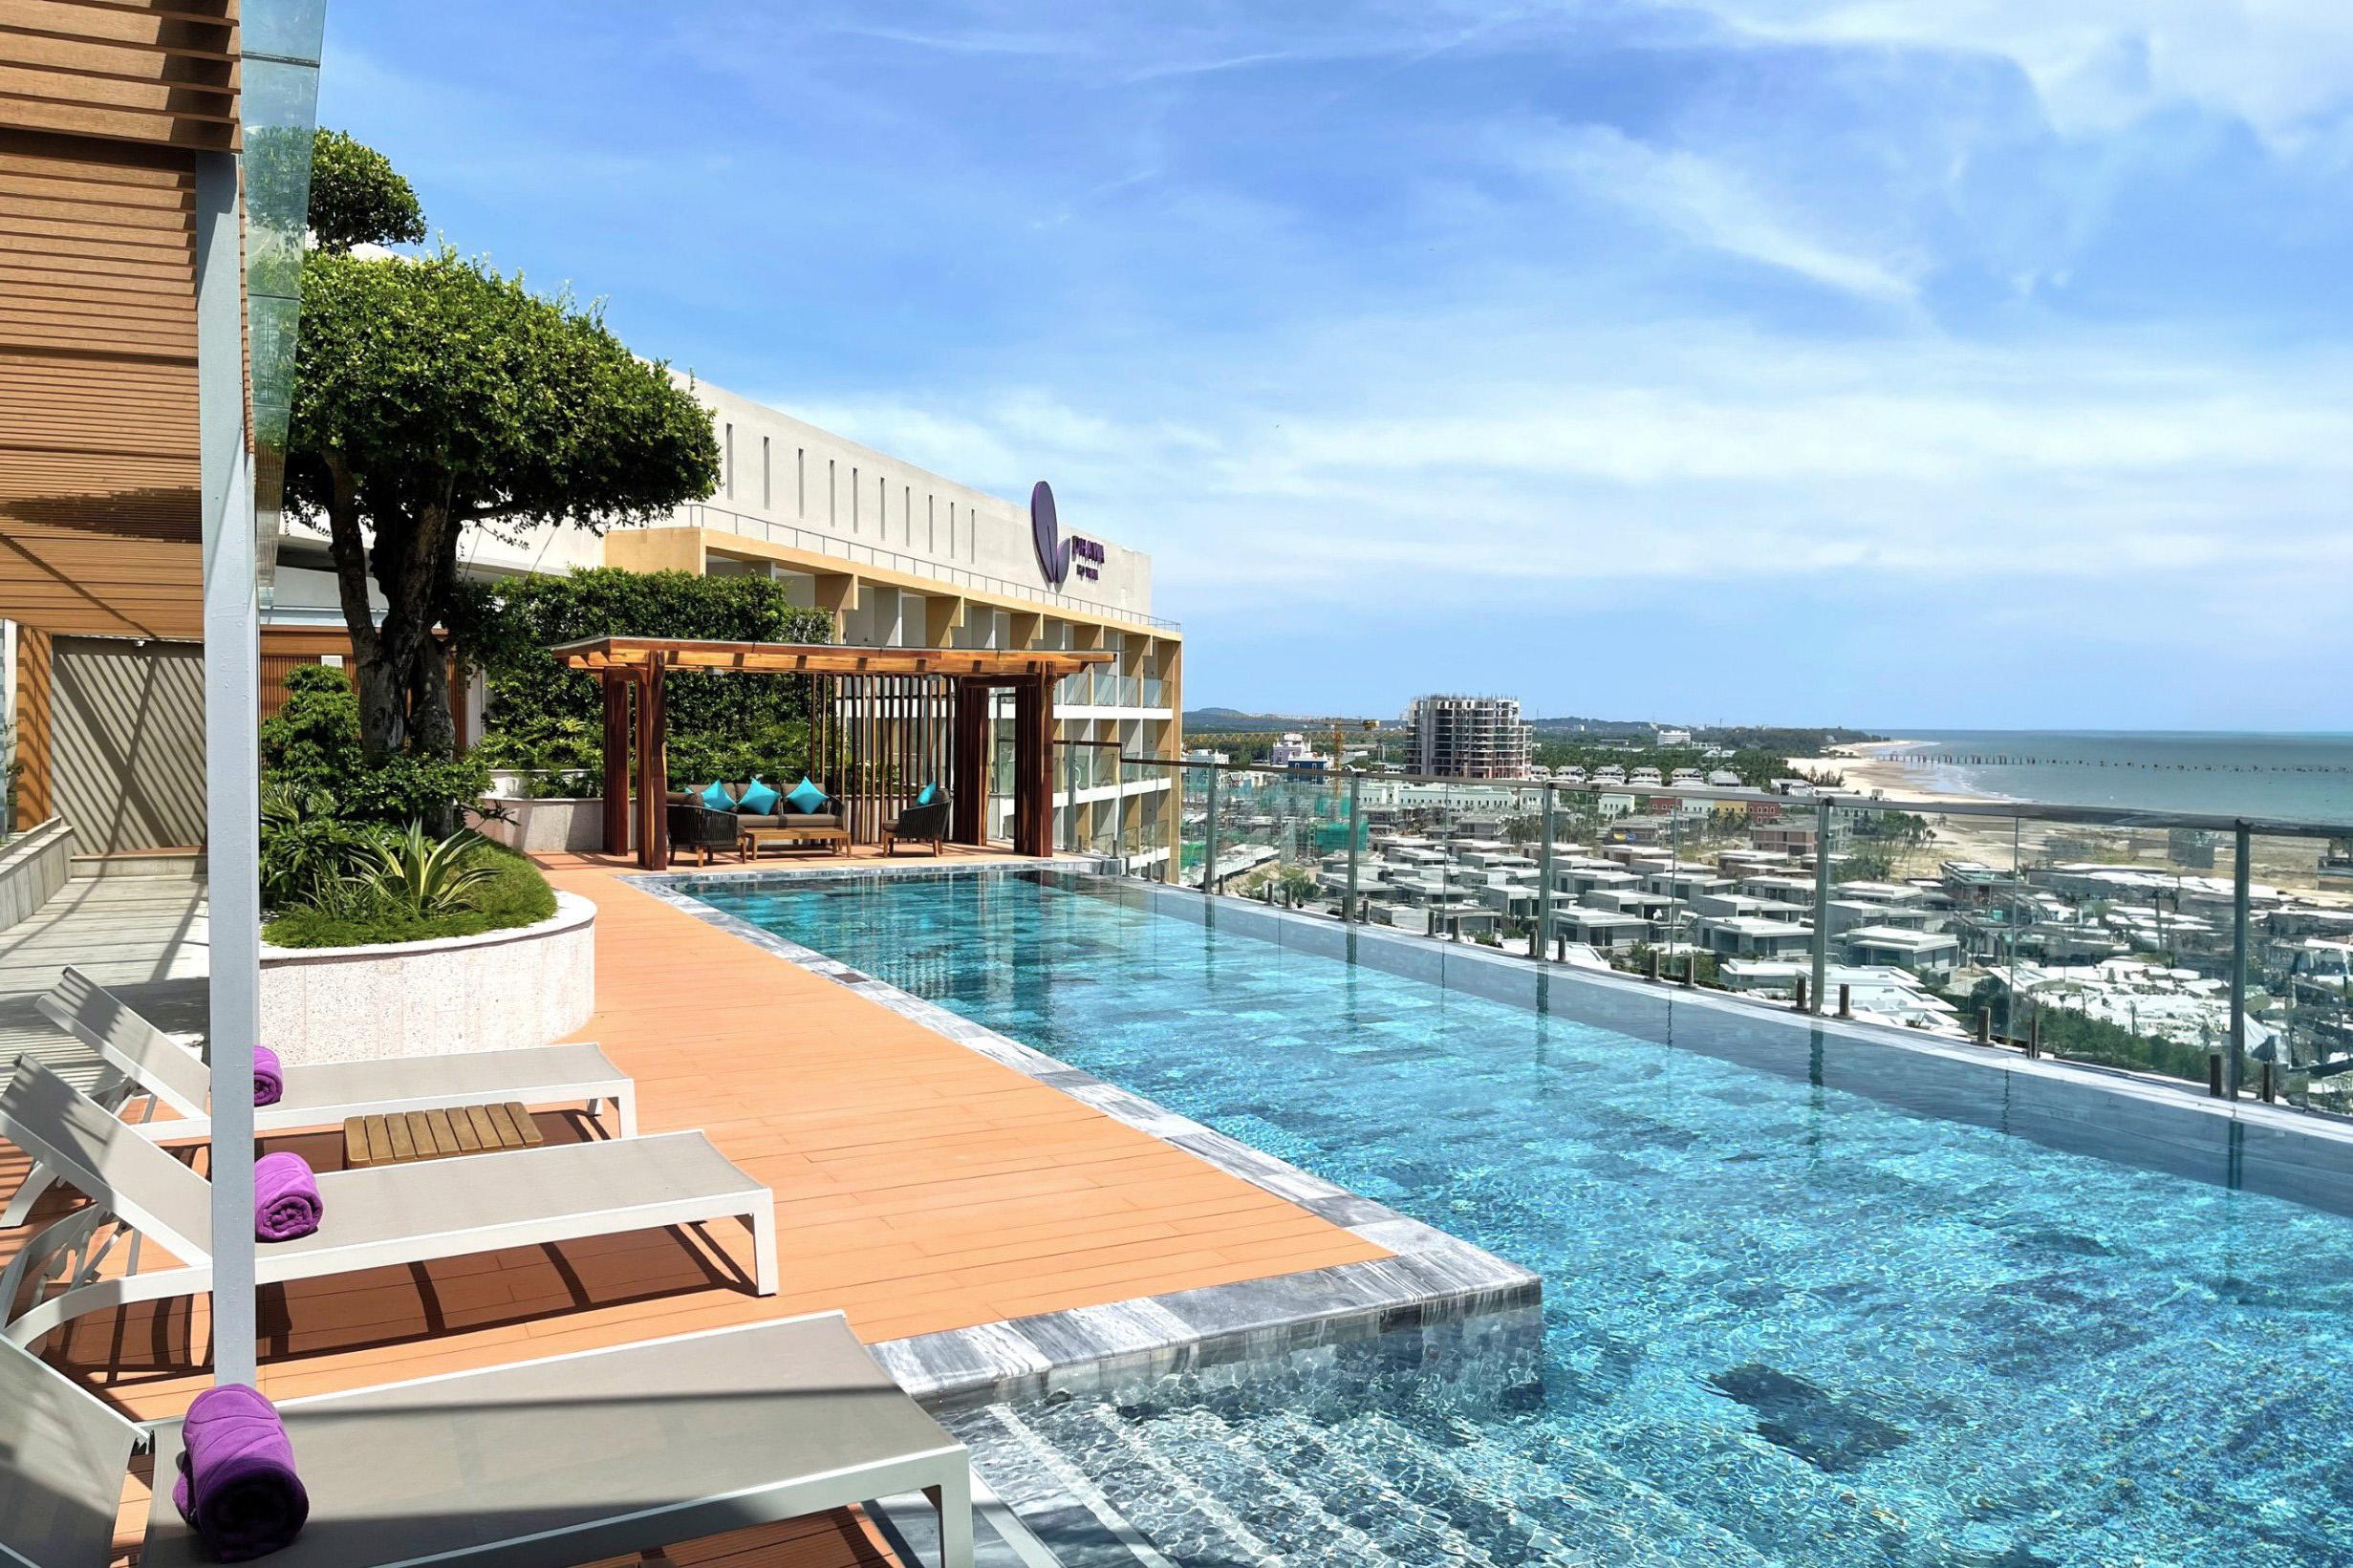 A high-class outdoor pool and deck inside the stella sky suite